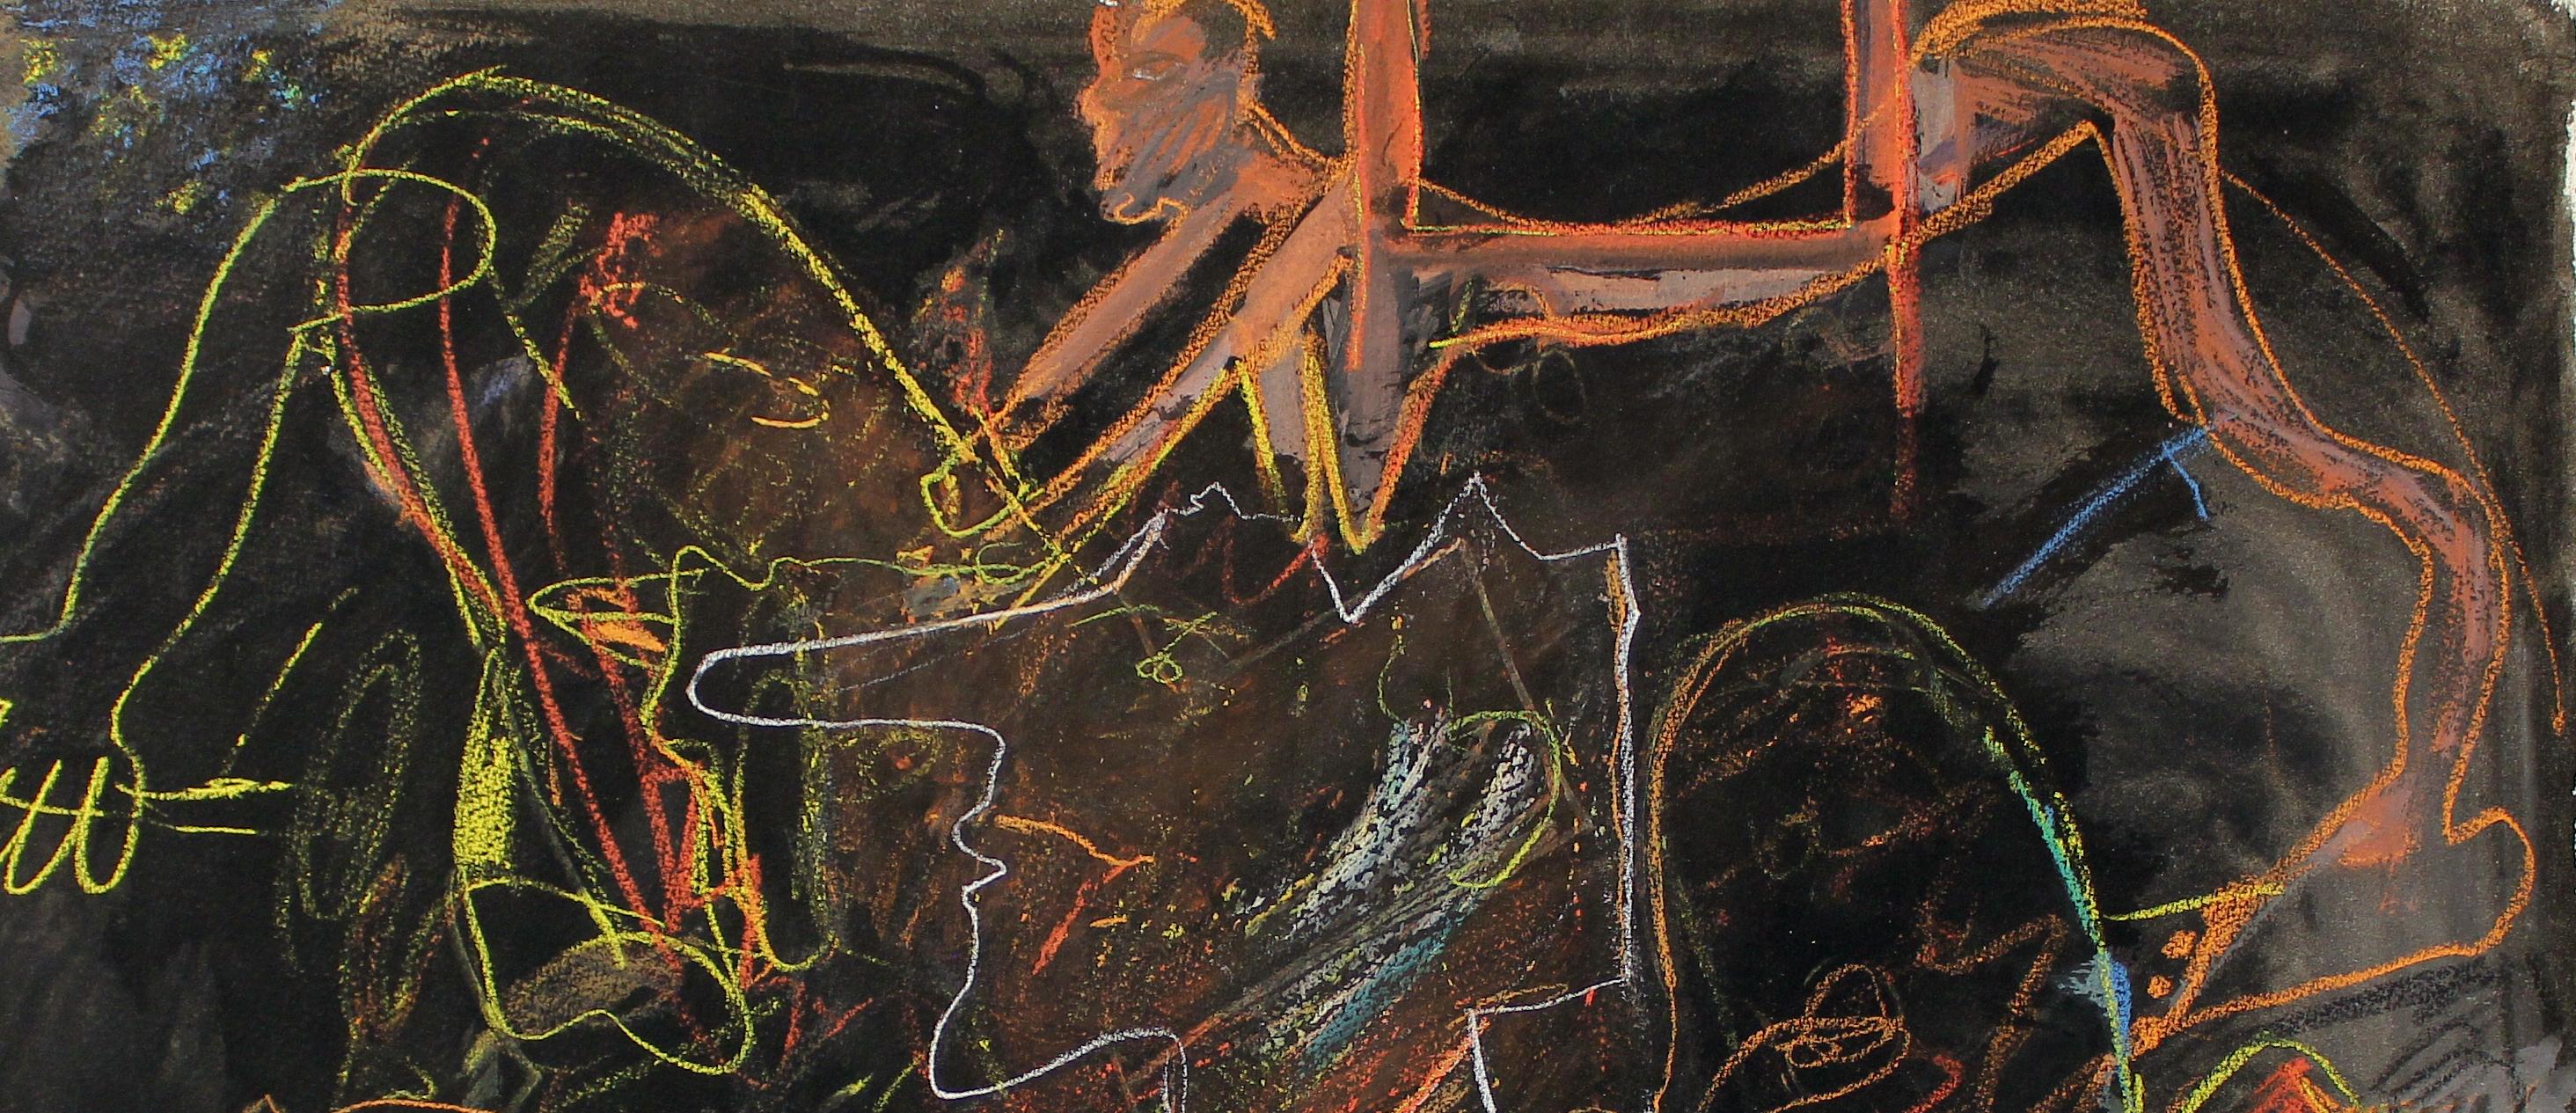 Figures on Black, 1960s, pastel on black acrylic ground on paper, signed lower middle.